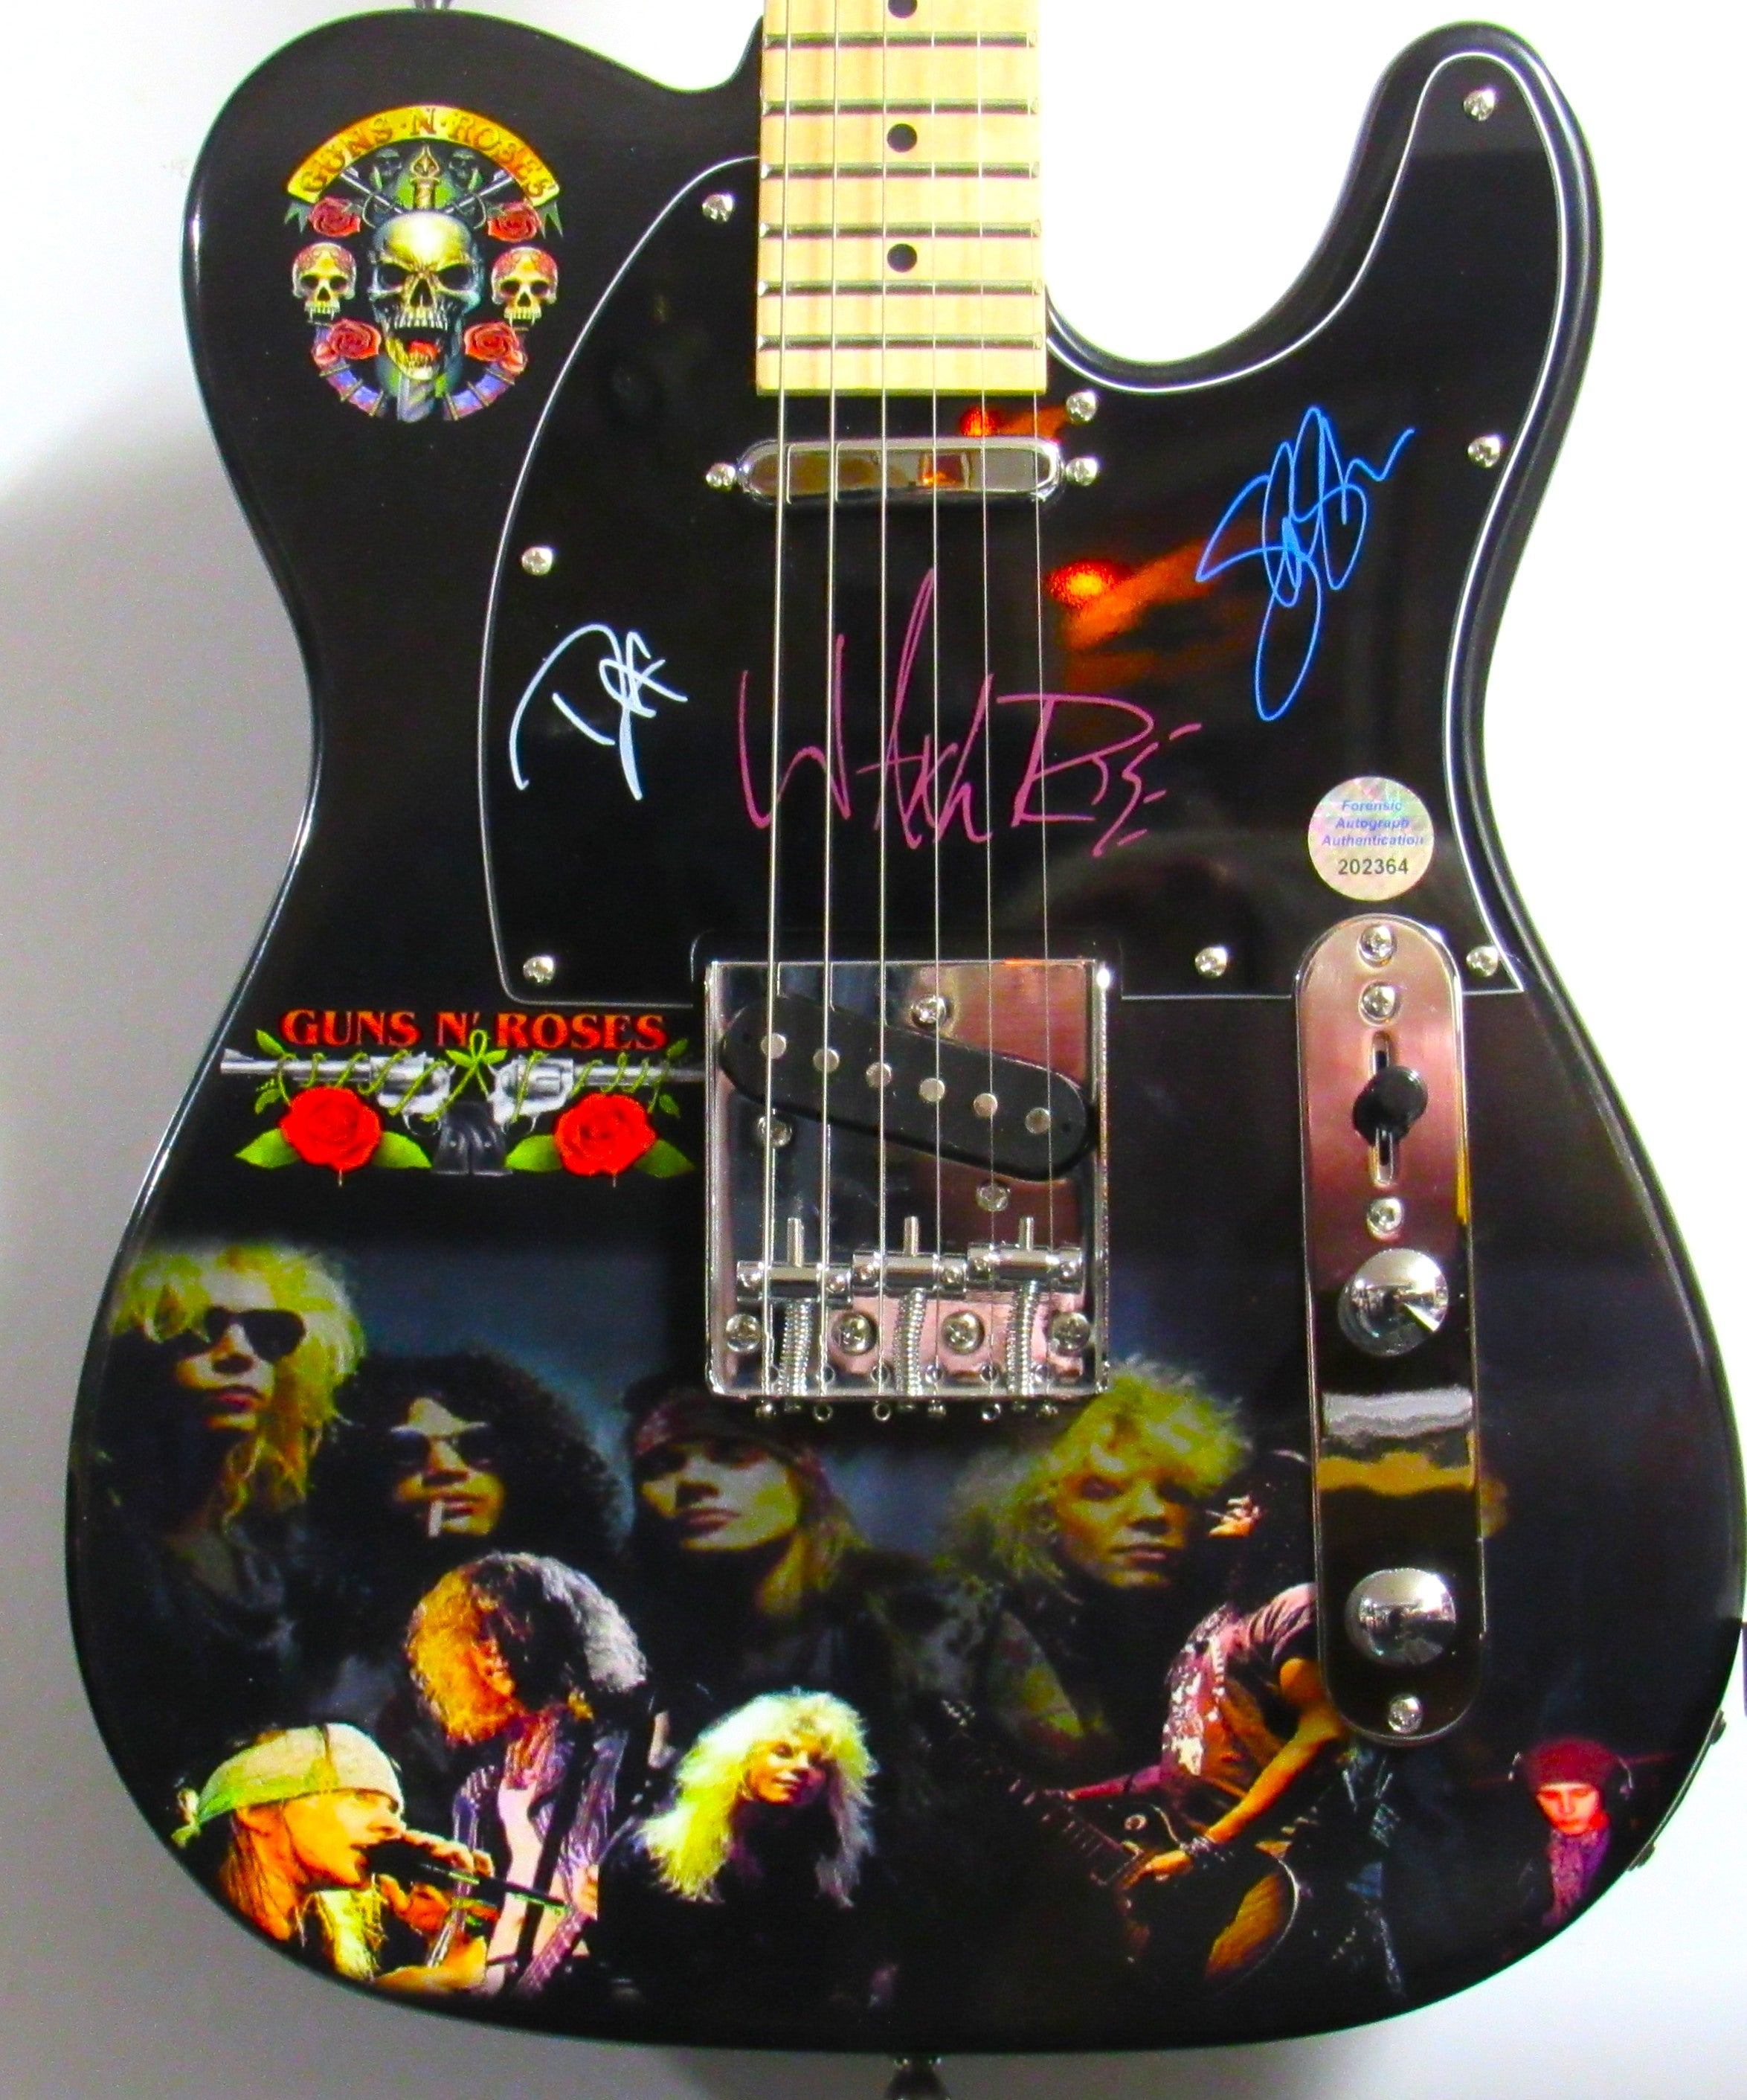 Guns N' Roses - Autographed Guitar | Zion Graphic Collectibles